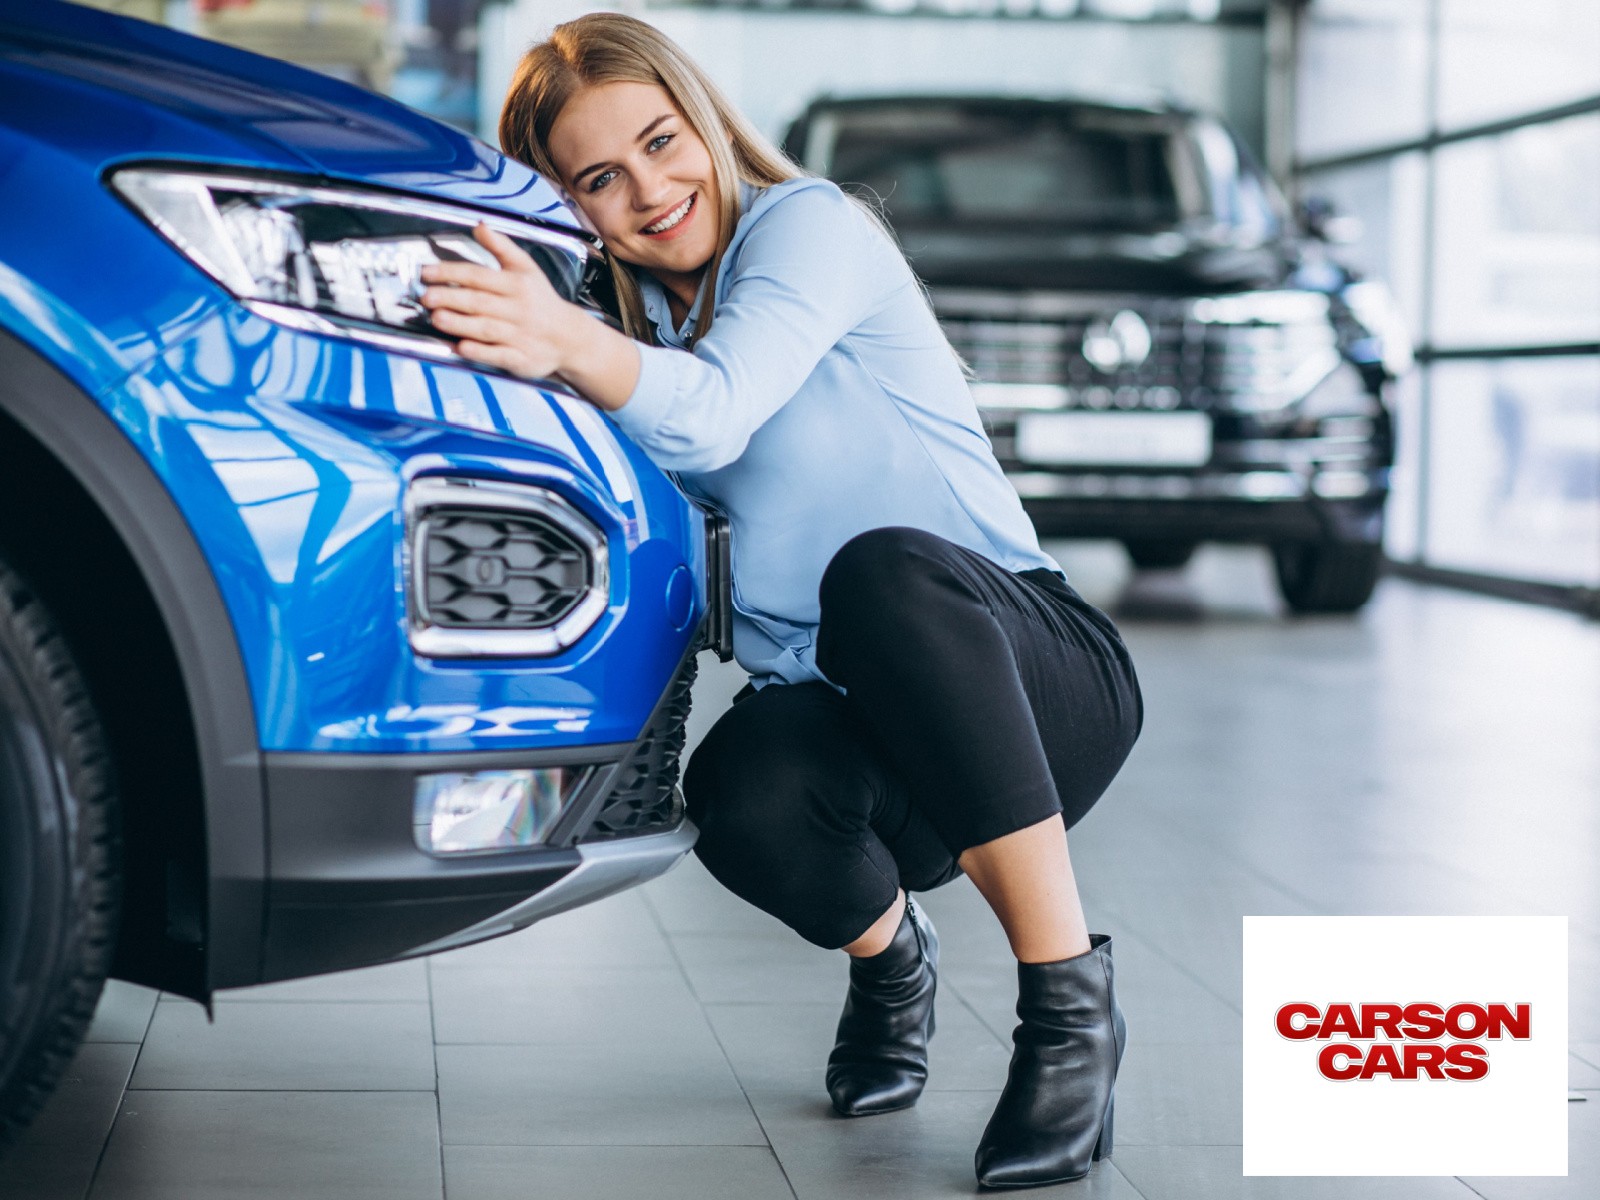 Discover Low Mileage Gems from Carson Cars!